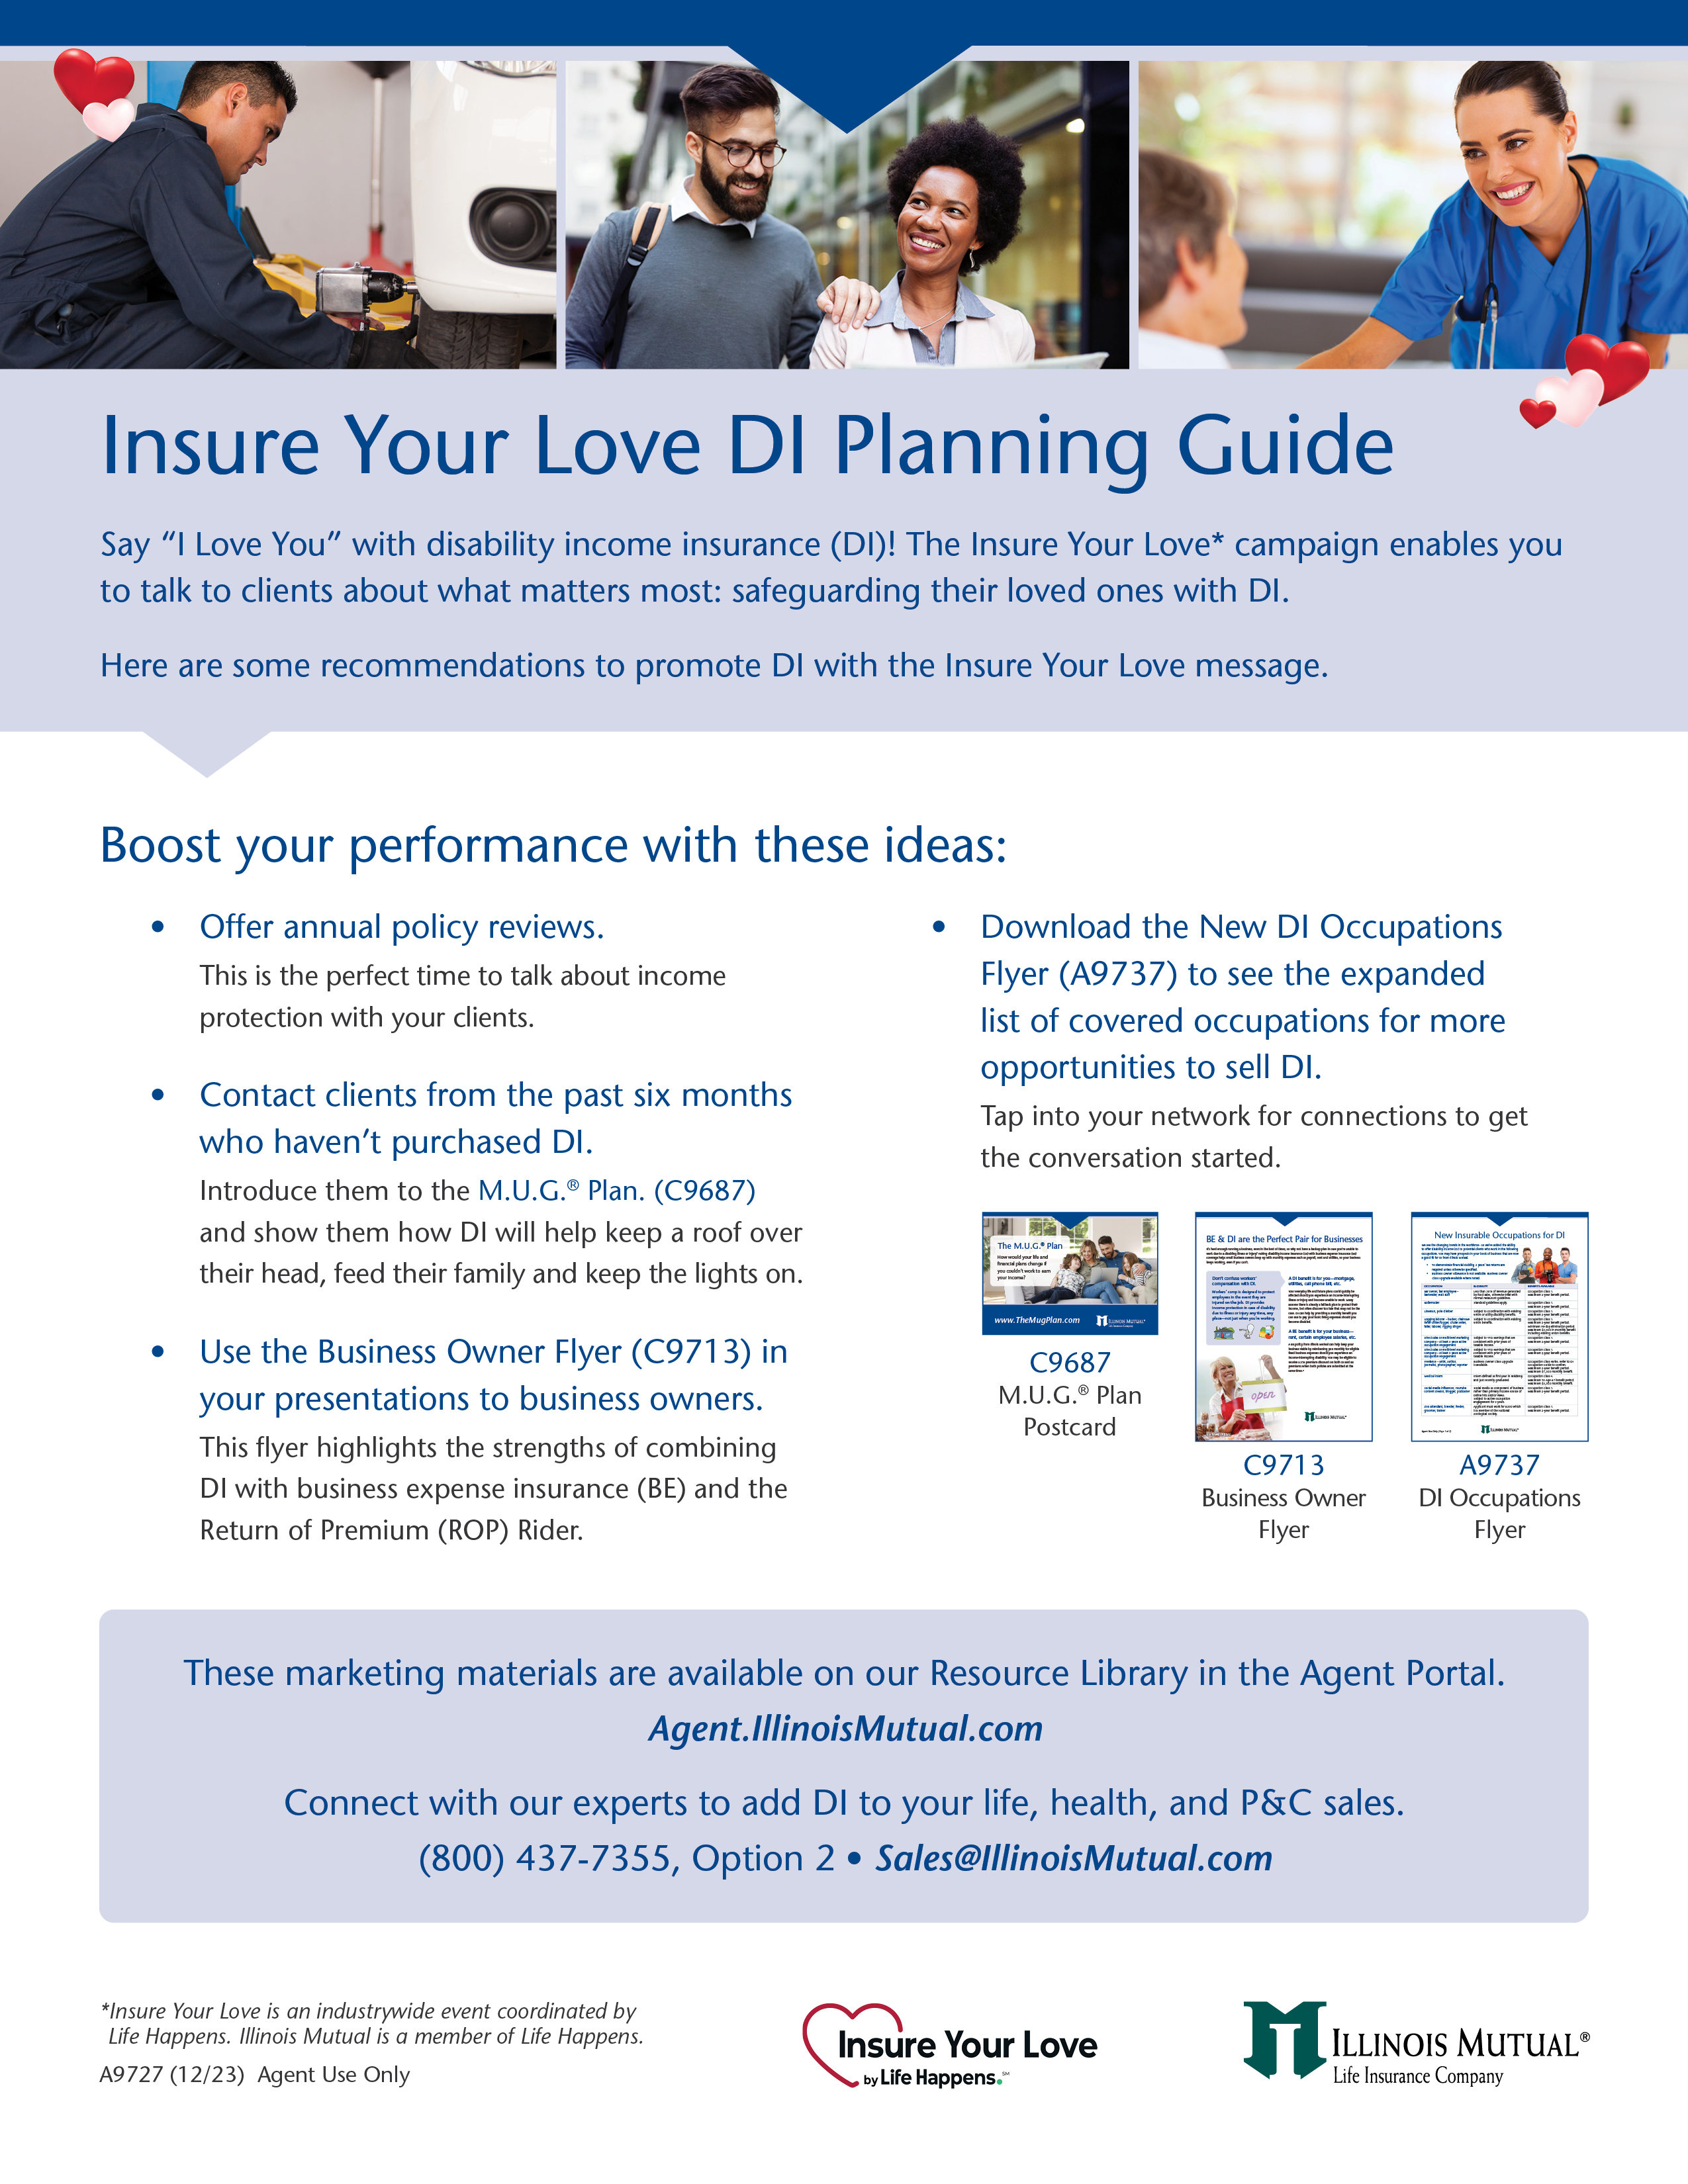 image of Insure Your Love
Planning Guide for DI A9727